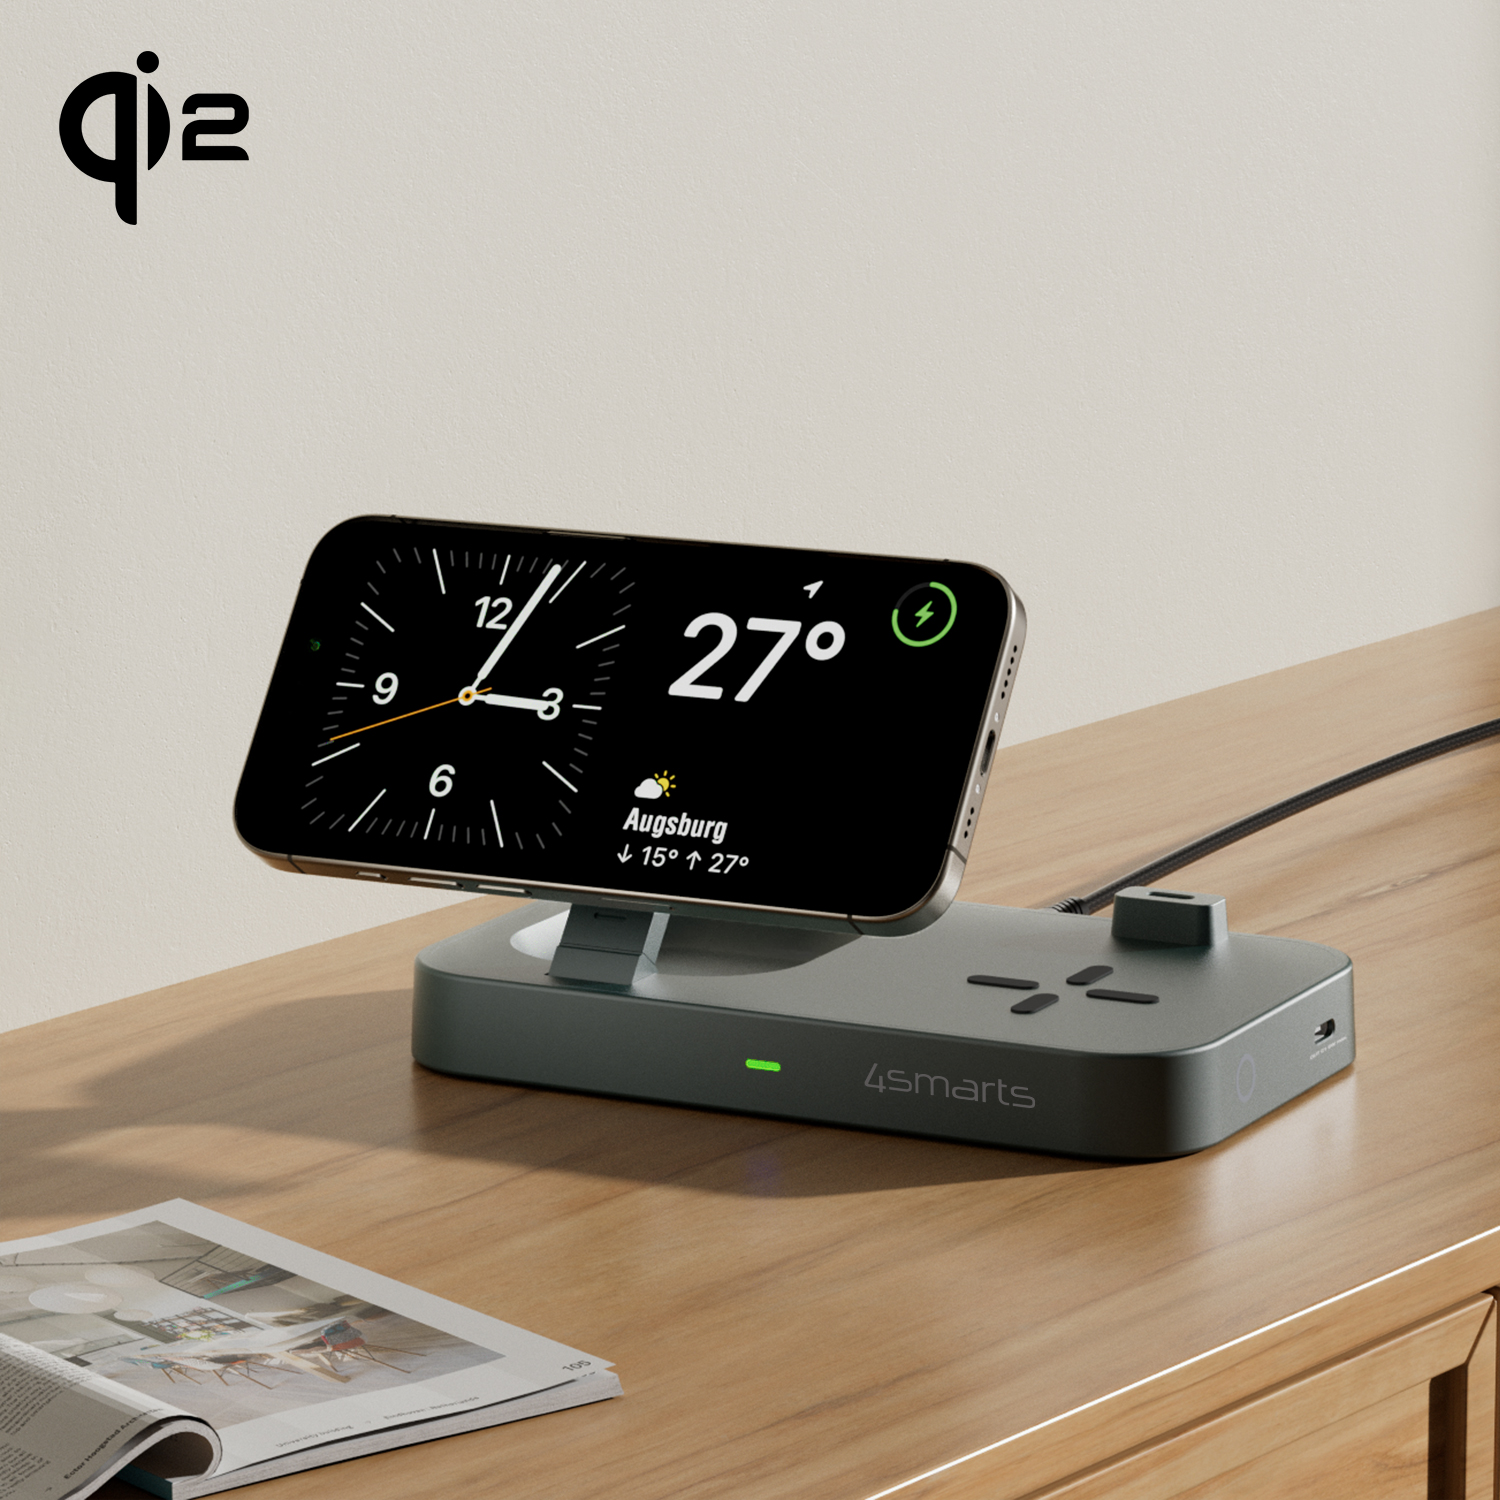 The 3-in-1 4smarts Qi2 Trident Charging Station looks good anywhere - in the office, kitchen or living room.